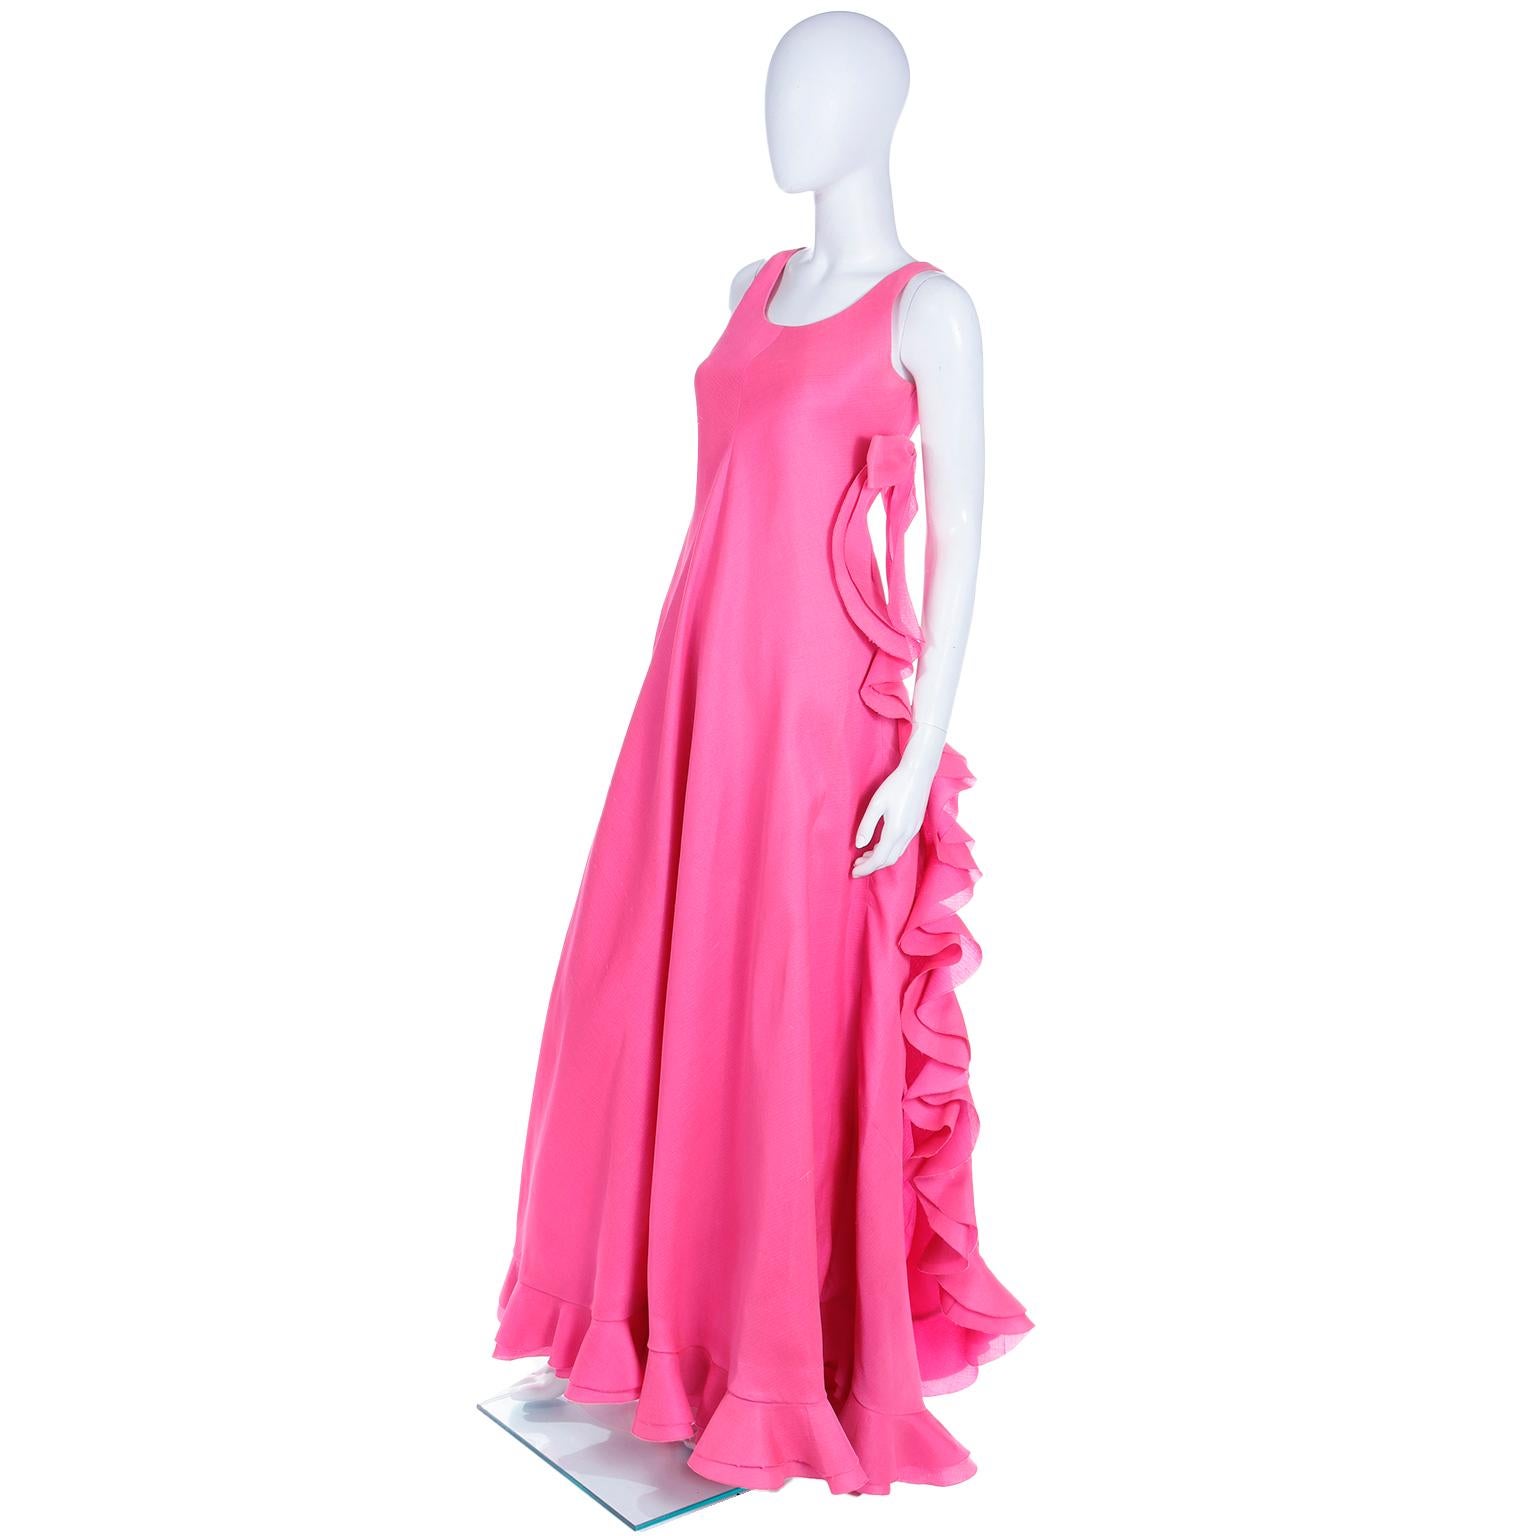 1971 Christian Dior Haute Couture Pink Ruffled Runway Evening Dress Grace Kelly  For Sale 8